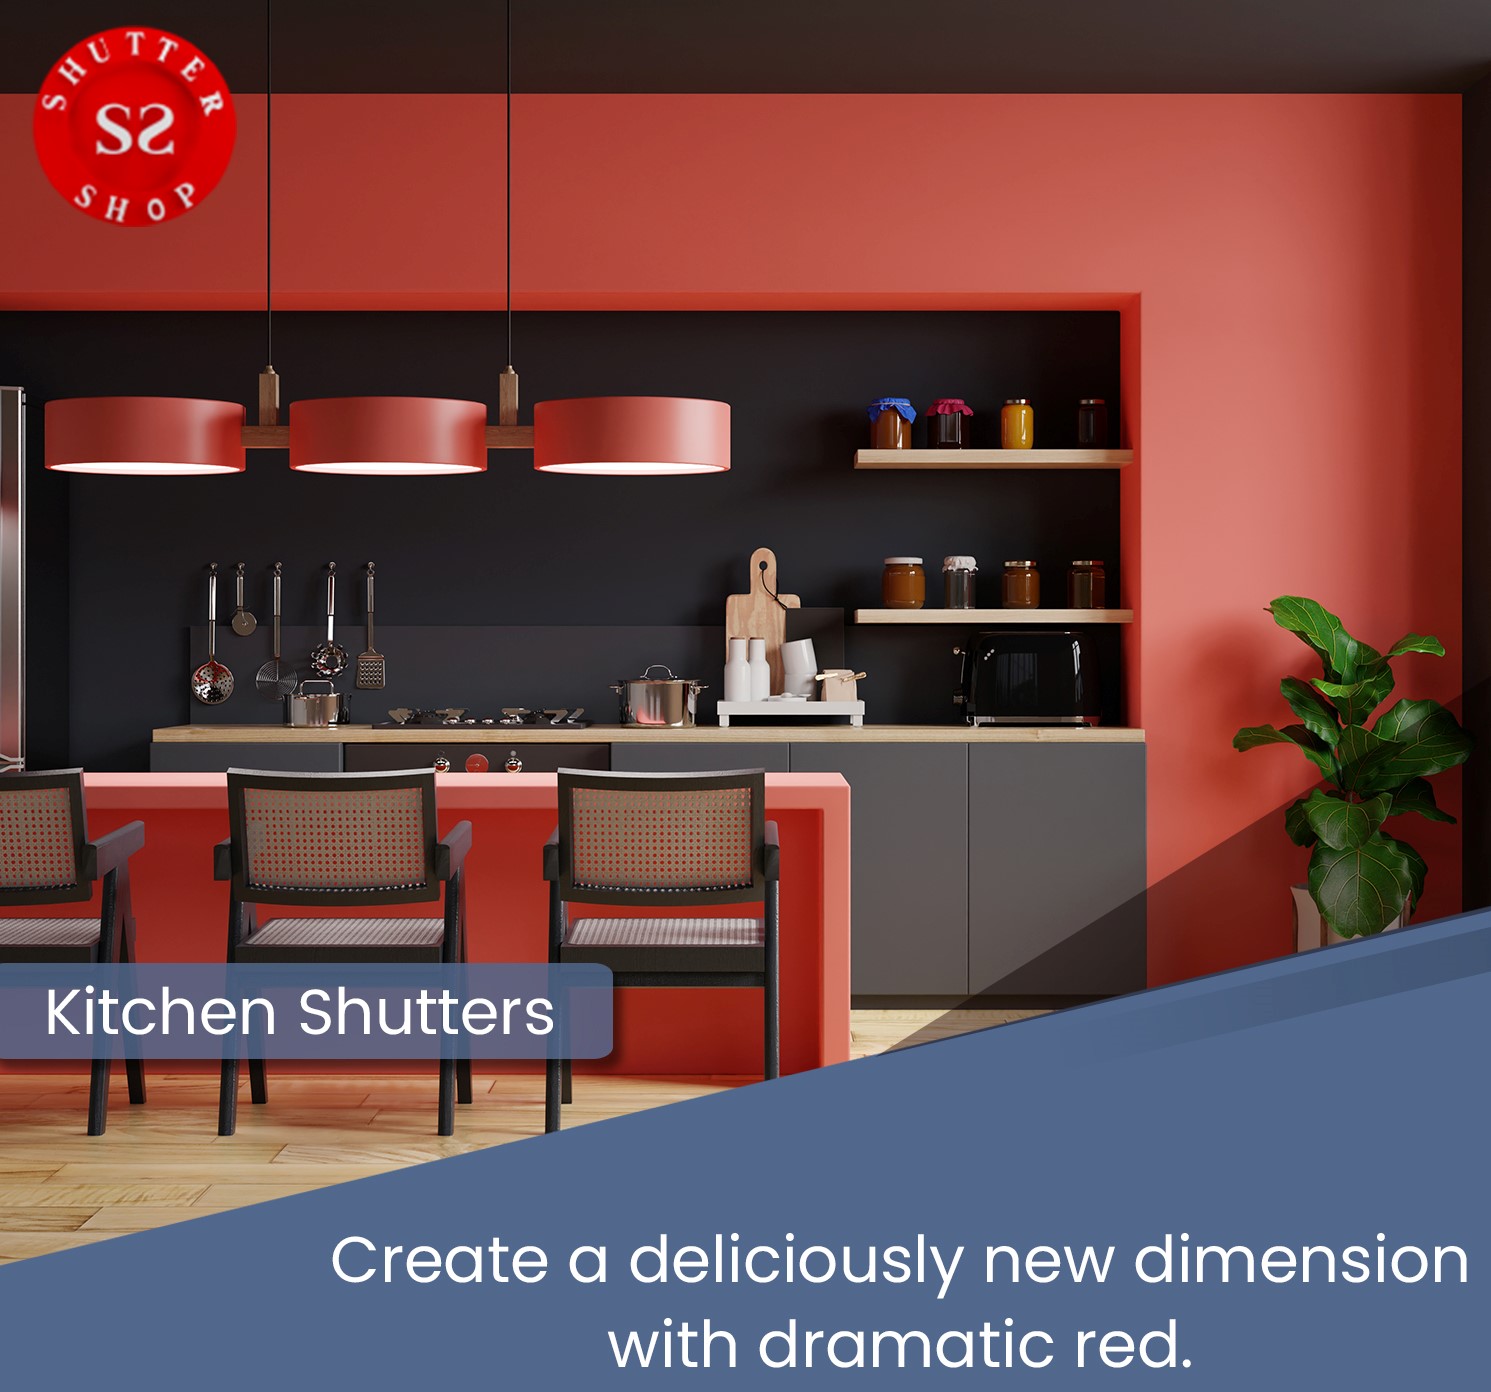 Modular kitchen Shutter manufactures in Bangalore, Specializes in modular kitchens design, Manufacture & Installation. Get kitchen shutters in various colors & styles.